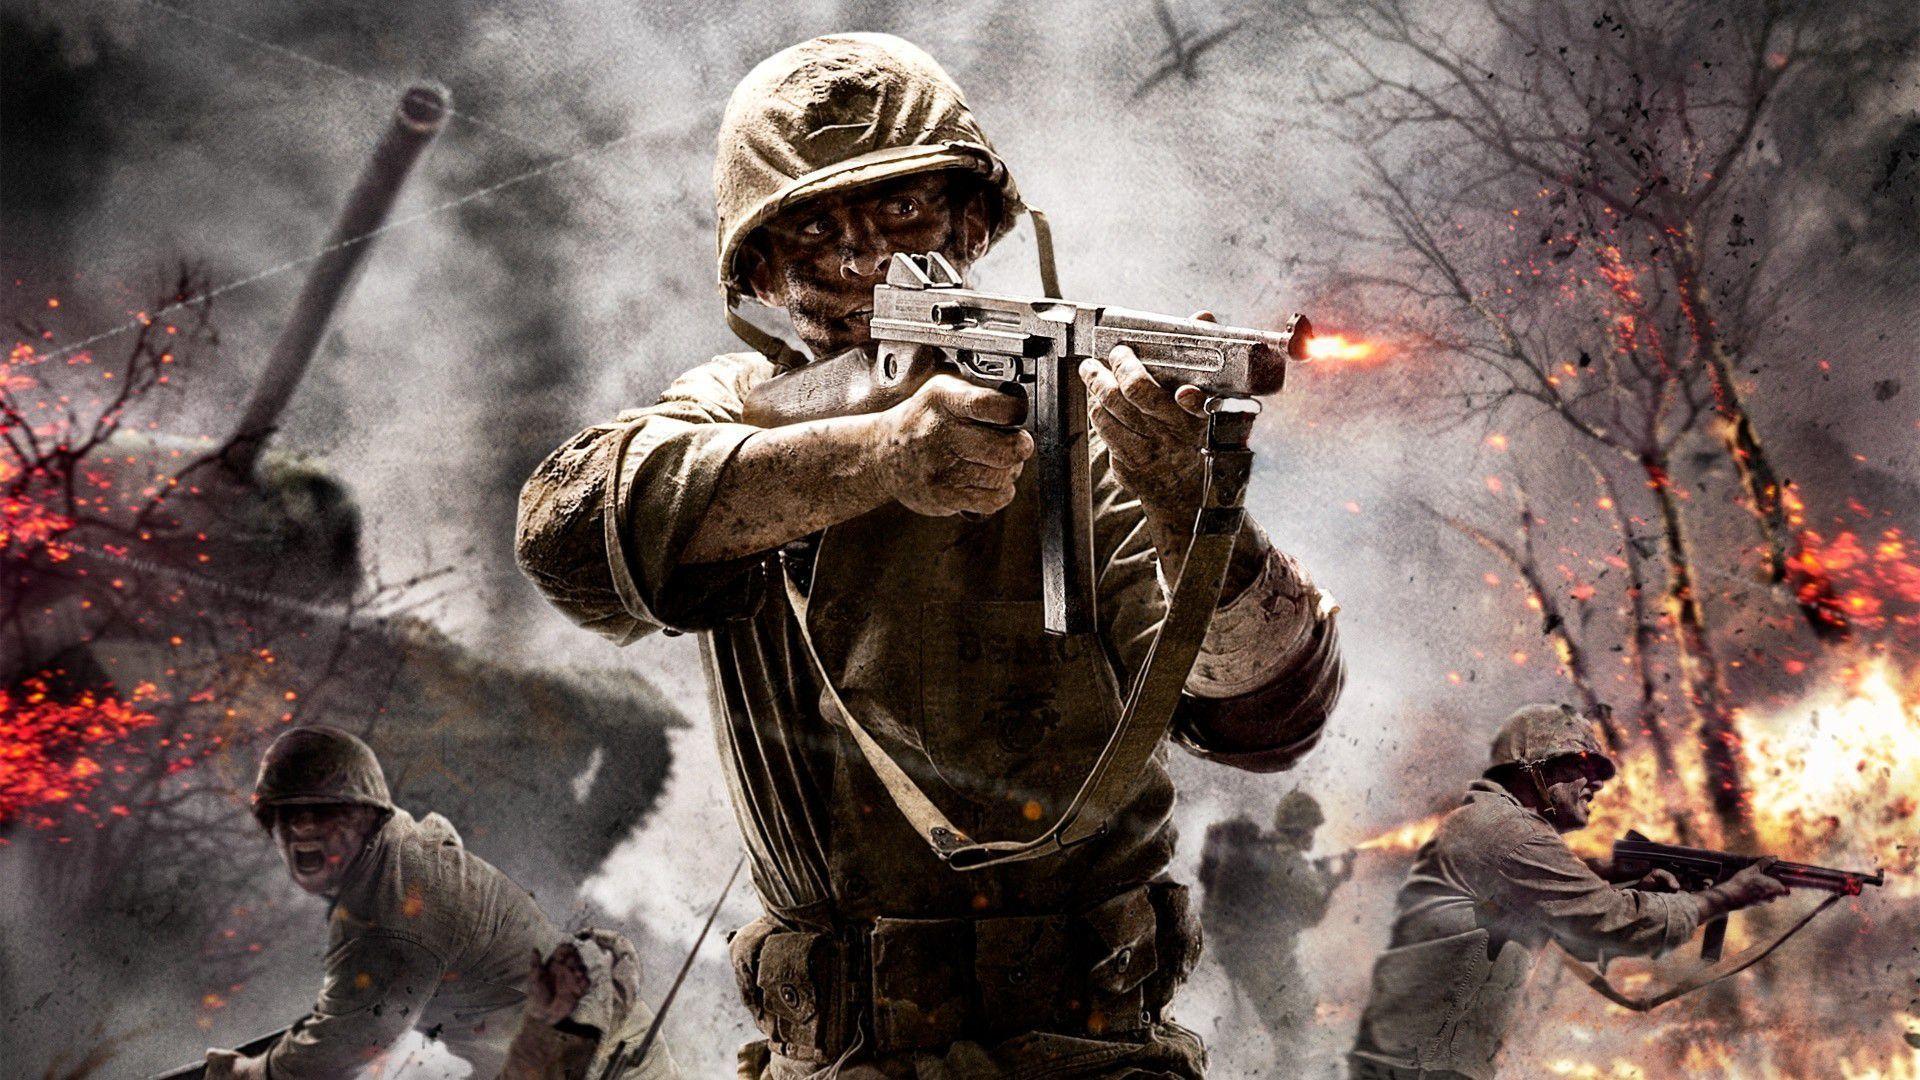 Download Call of Duty (COD) WW2 HD Wallpaper. Read games reviews